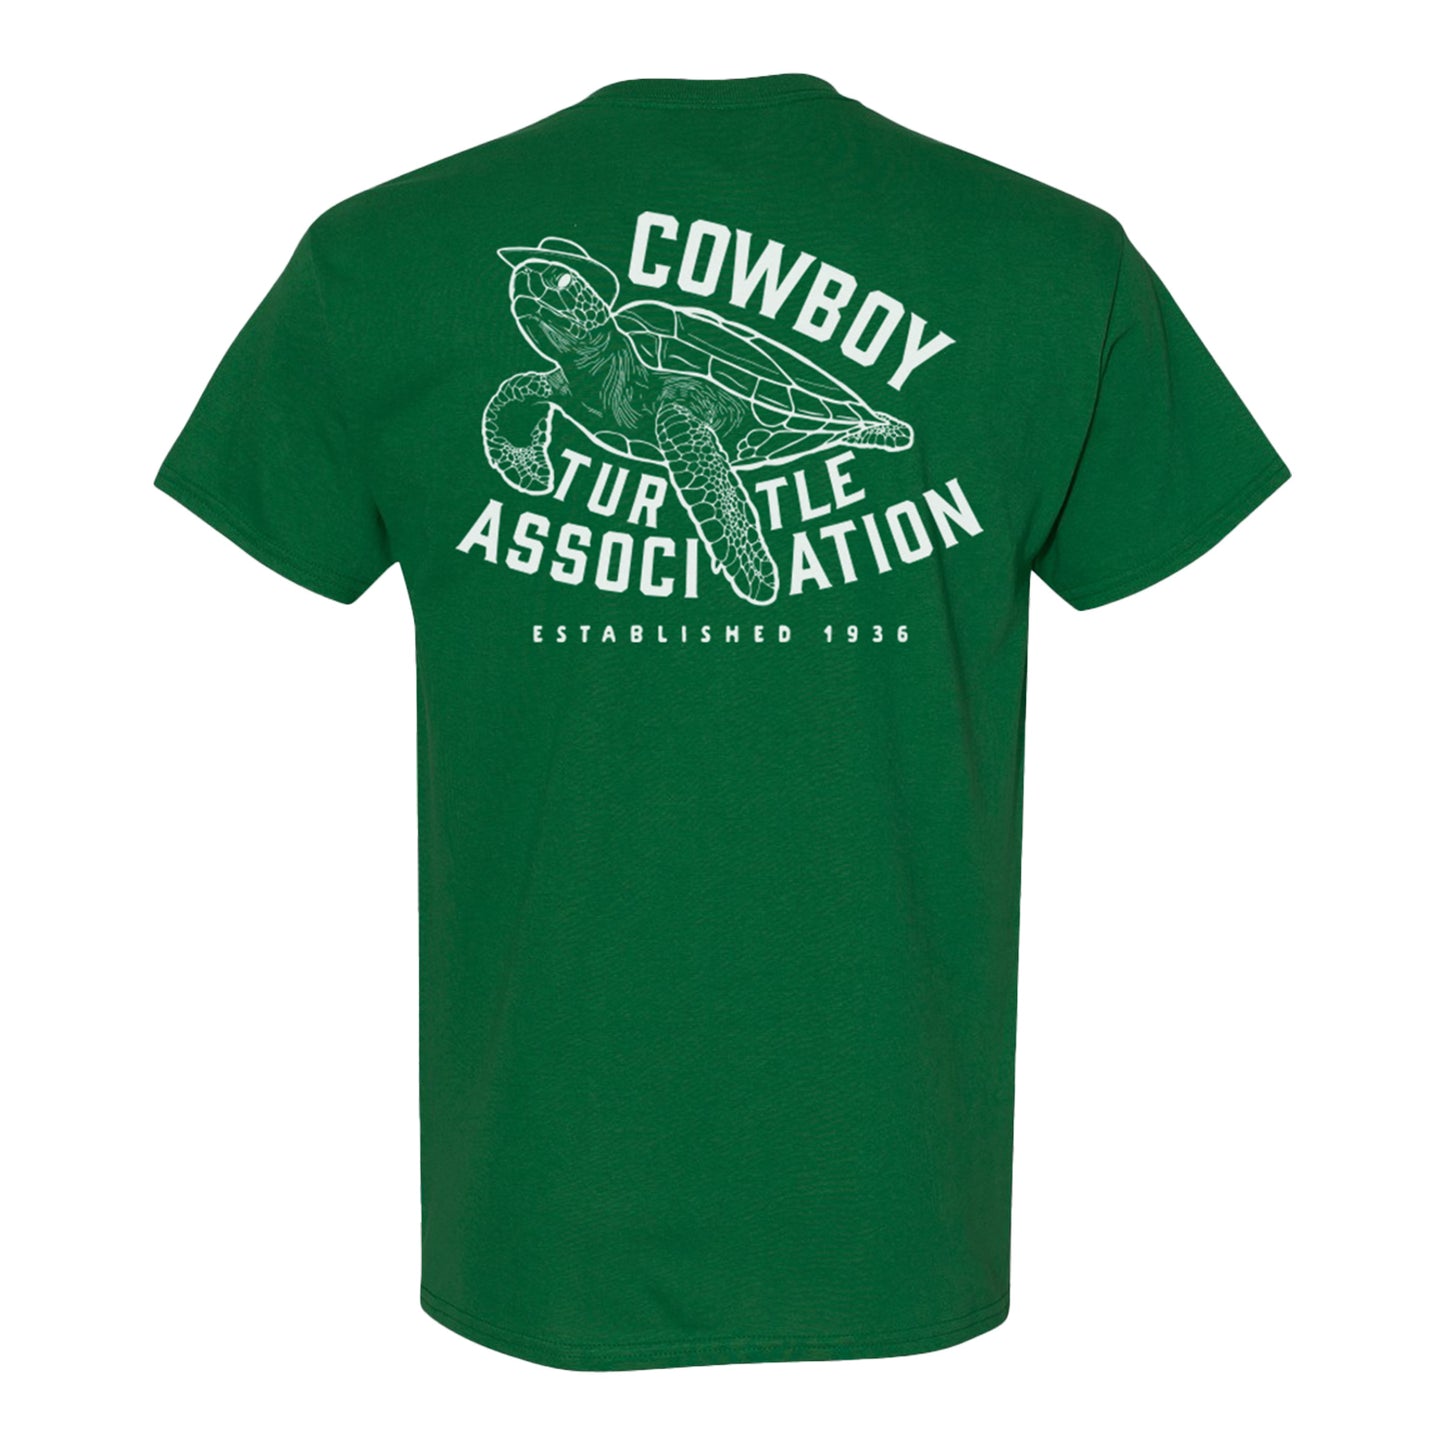 Cowboys' Turtle Association Retro T-Shirt in Green - Back View